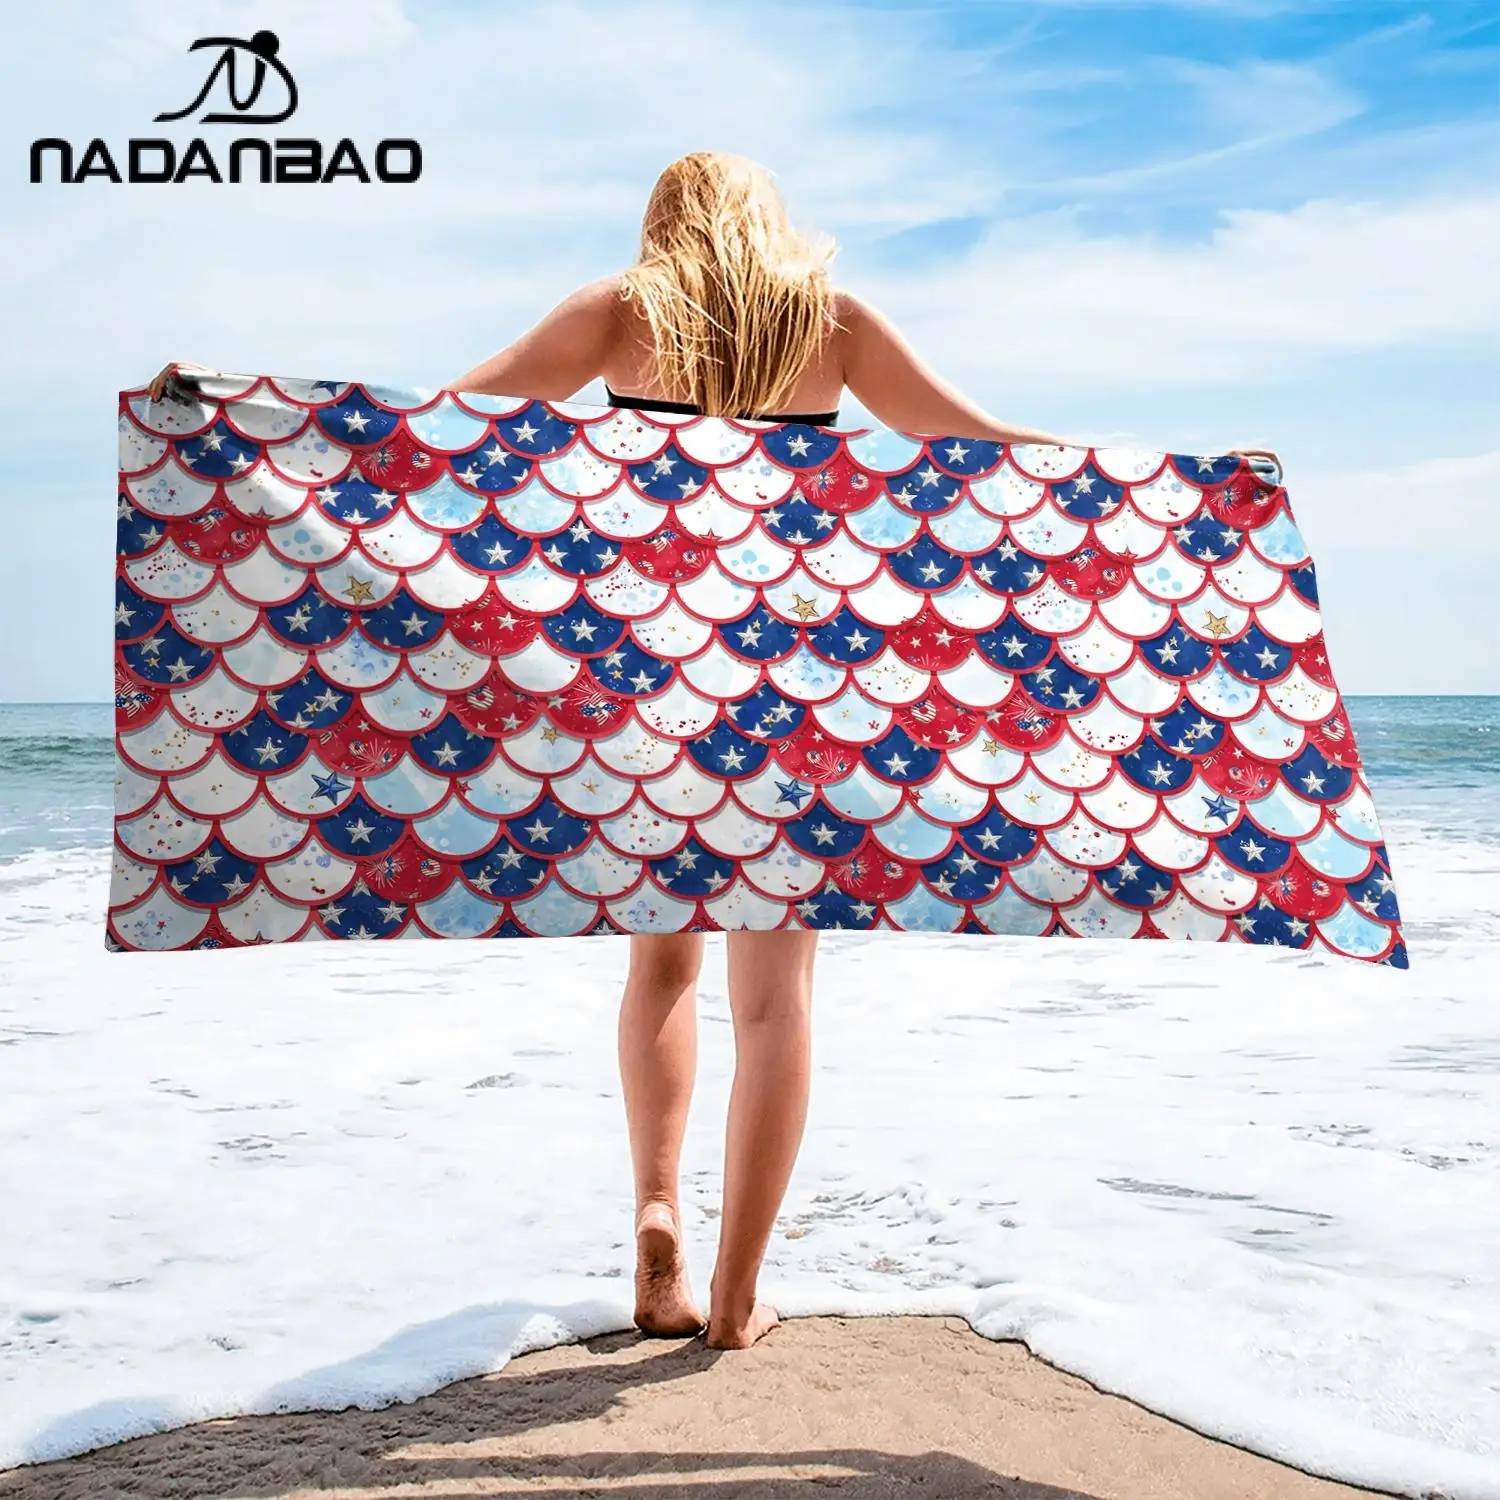 

NADANBAO Mermaid Outdoor Beach Swimming Towel Scale 3D Printed Water Sports Wrapped Bath Blanket Portable Sunscreen Beach Towels